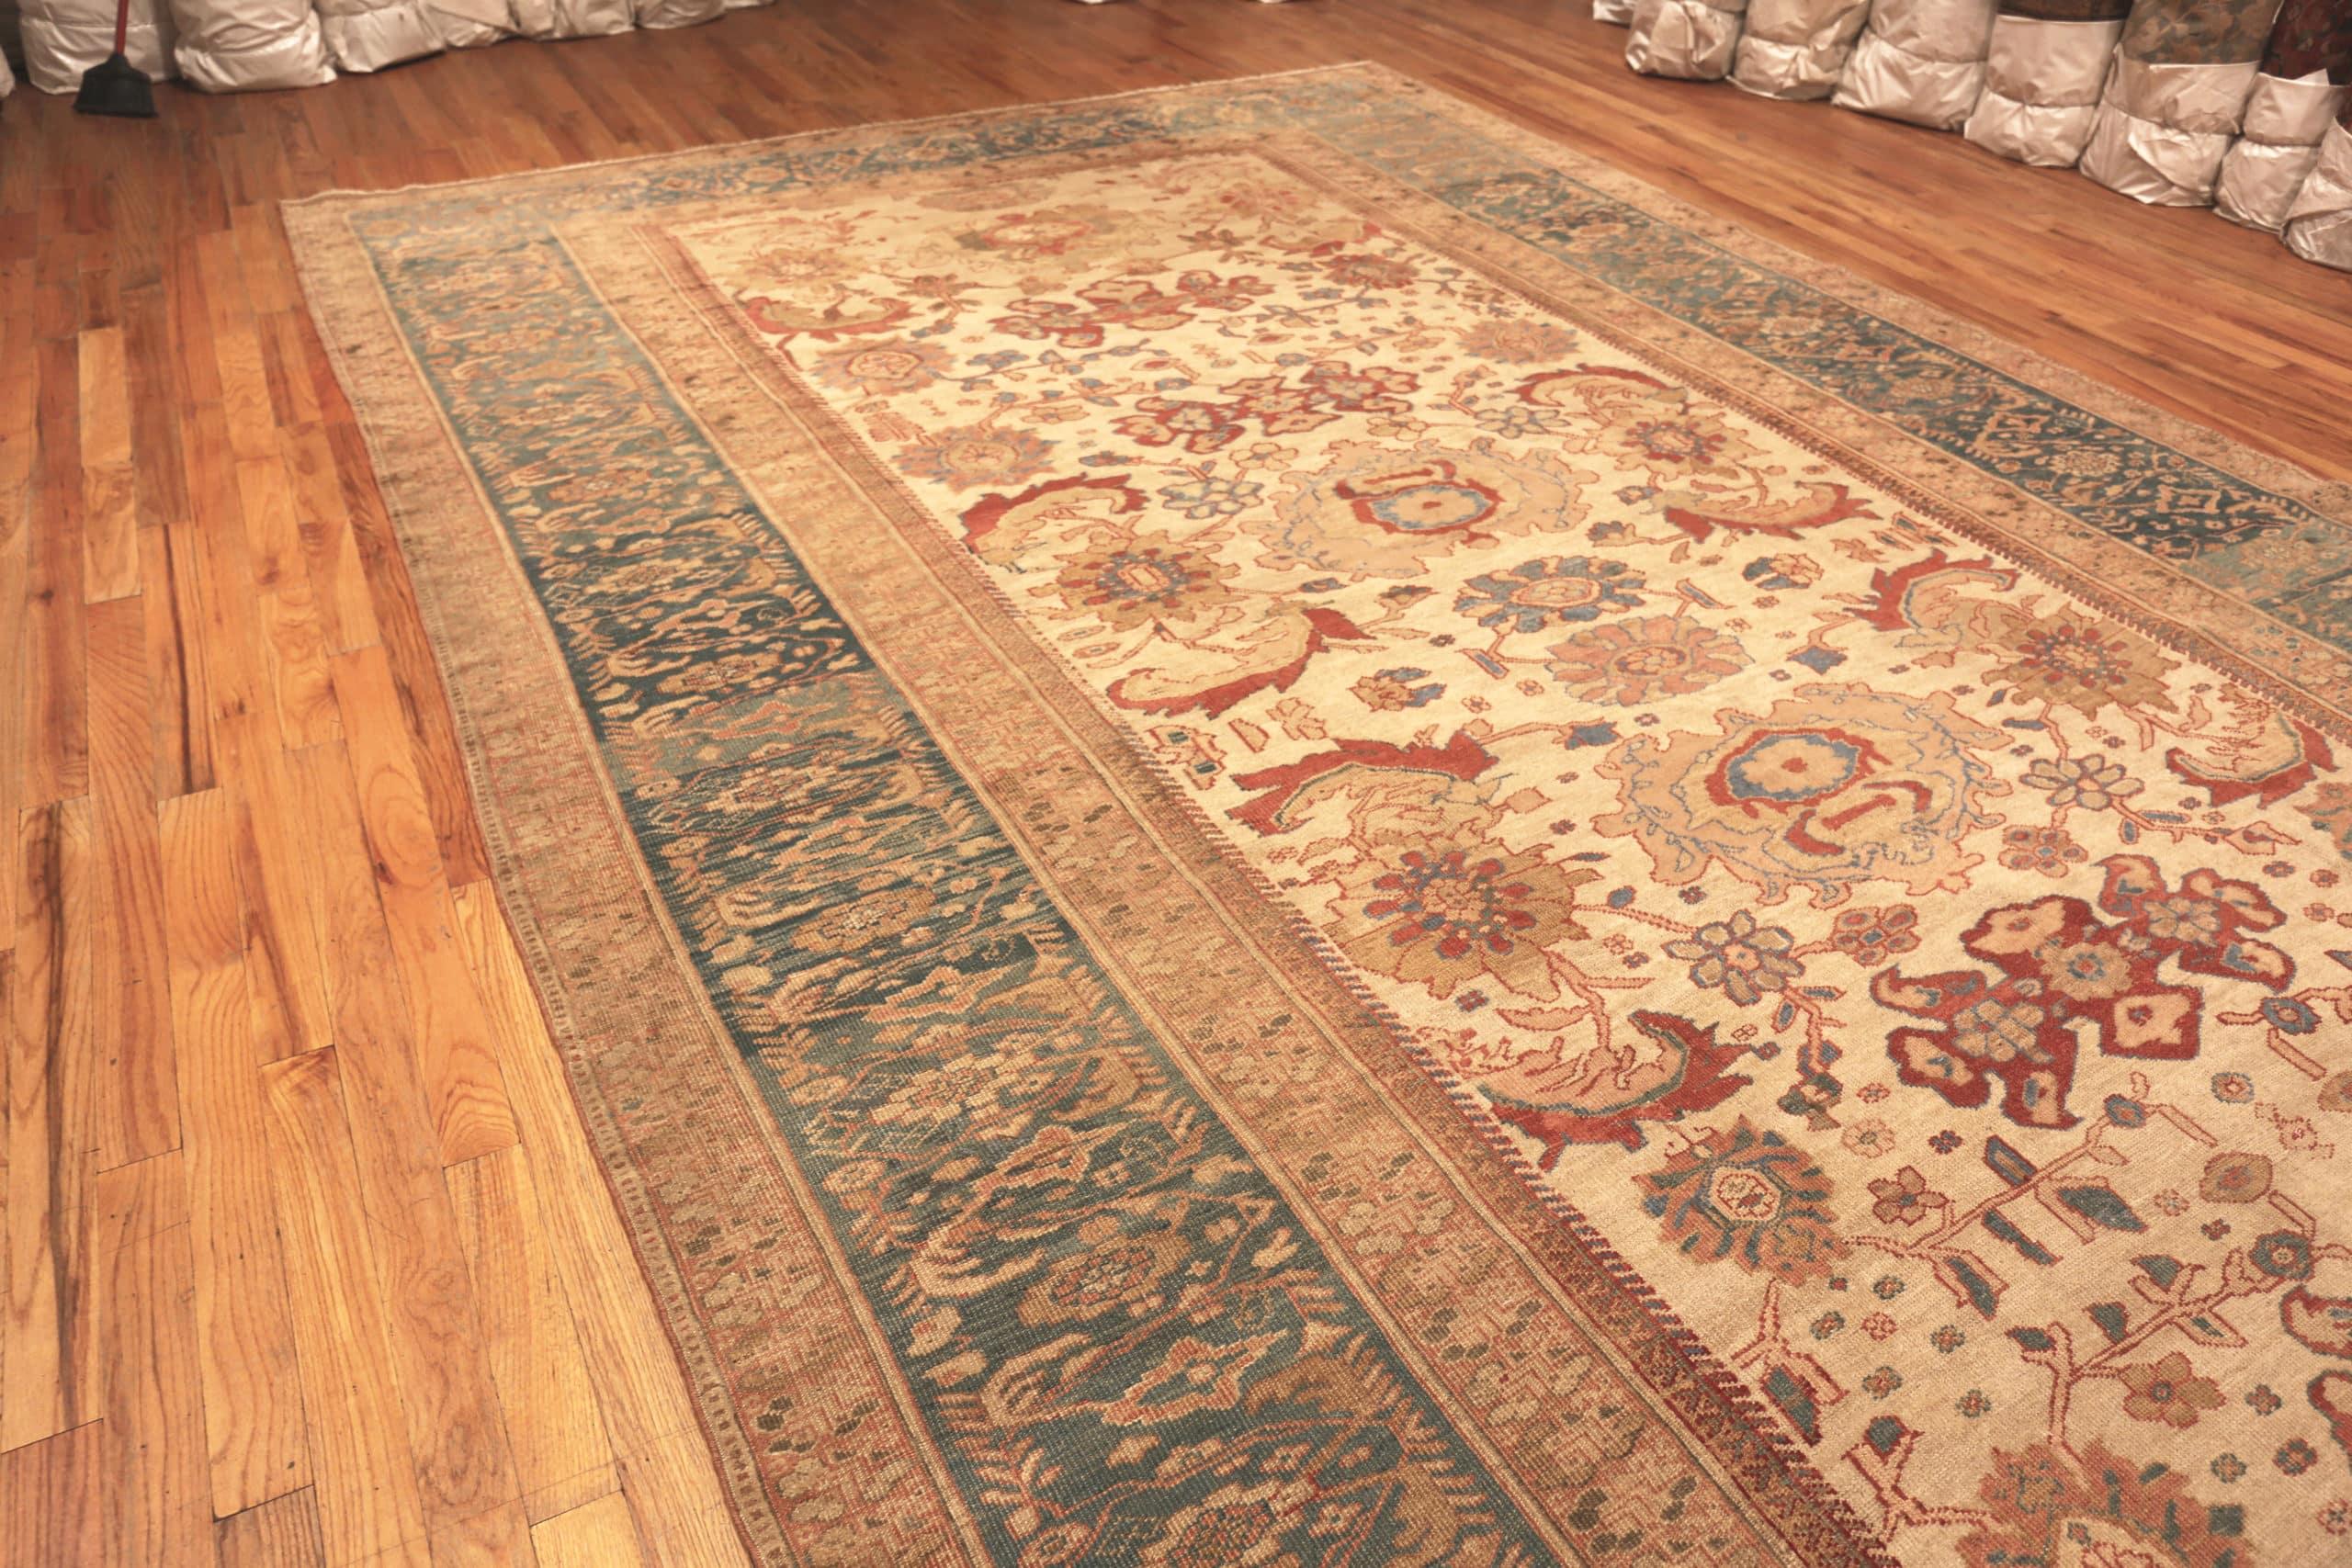 Nazmiyal Antique Ziegler Sultanabad Persian Rug. 10 ft 10 in x 17 ft 6 in 2